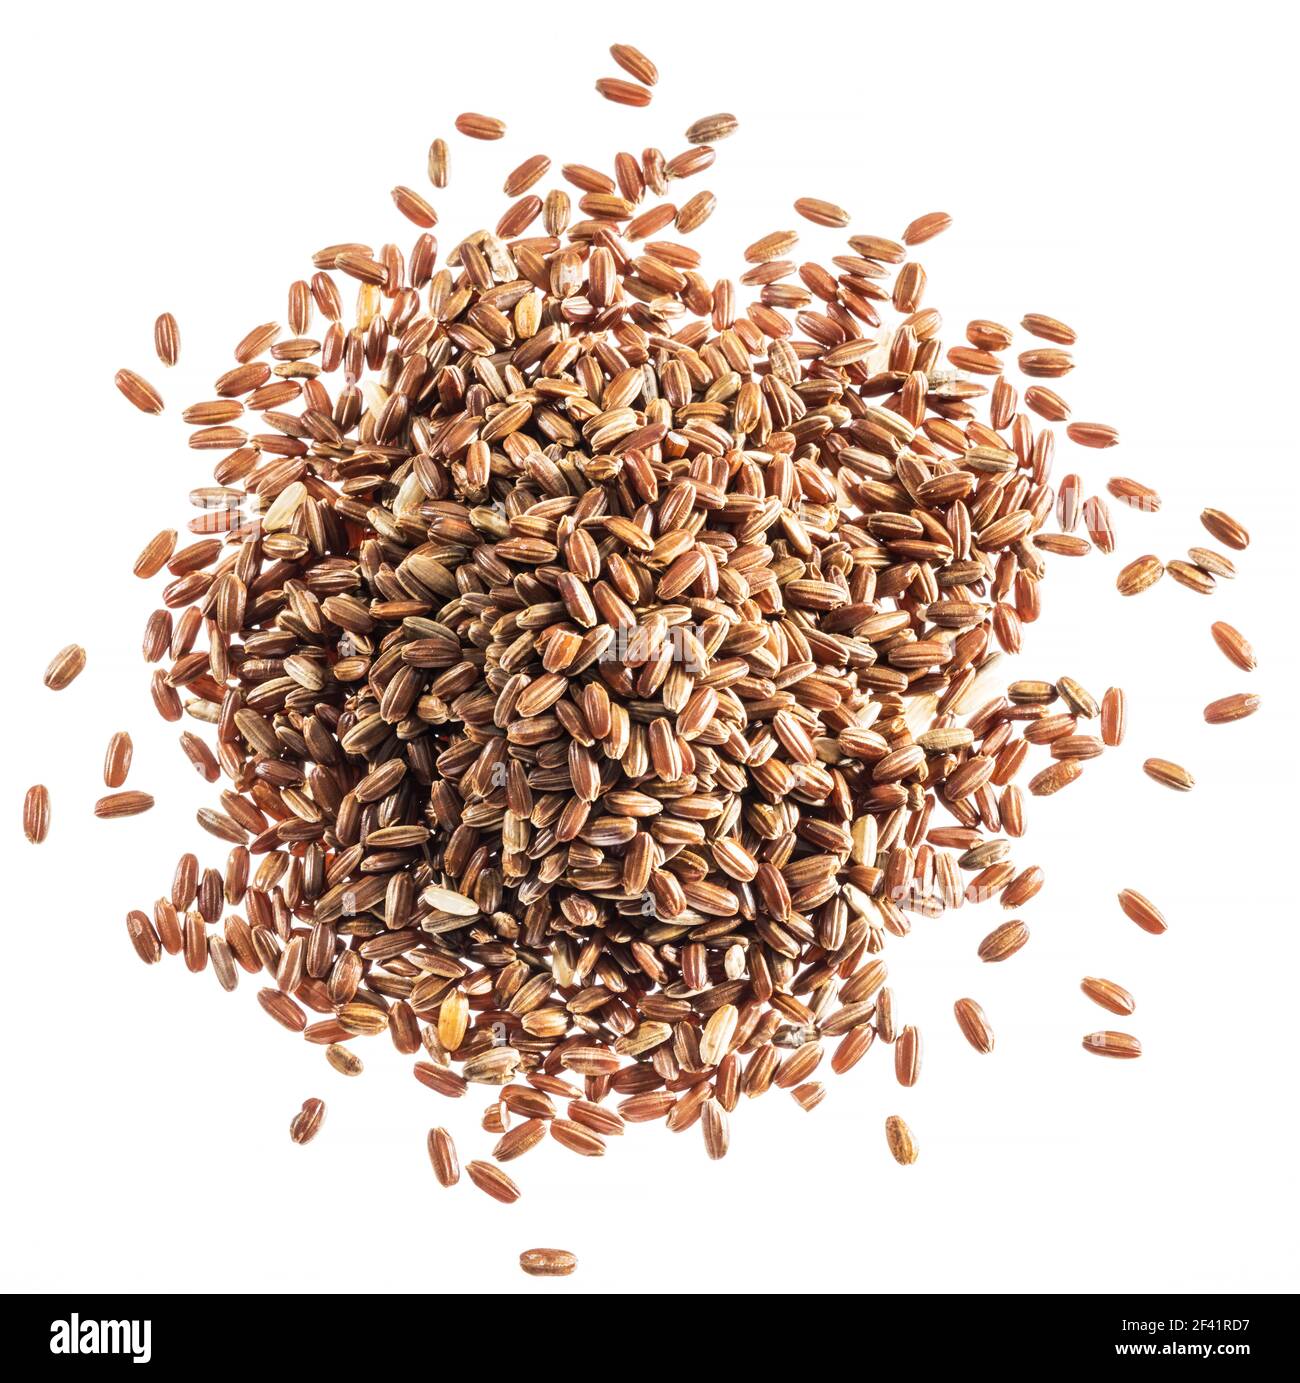 Brown rice heap - whole grain rice with outer hull or husk. Top view. Stock Photo